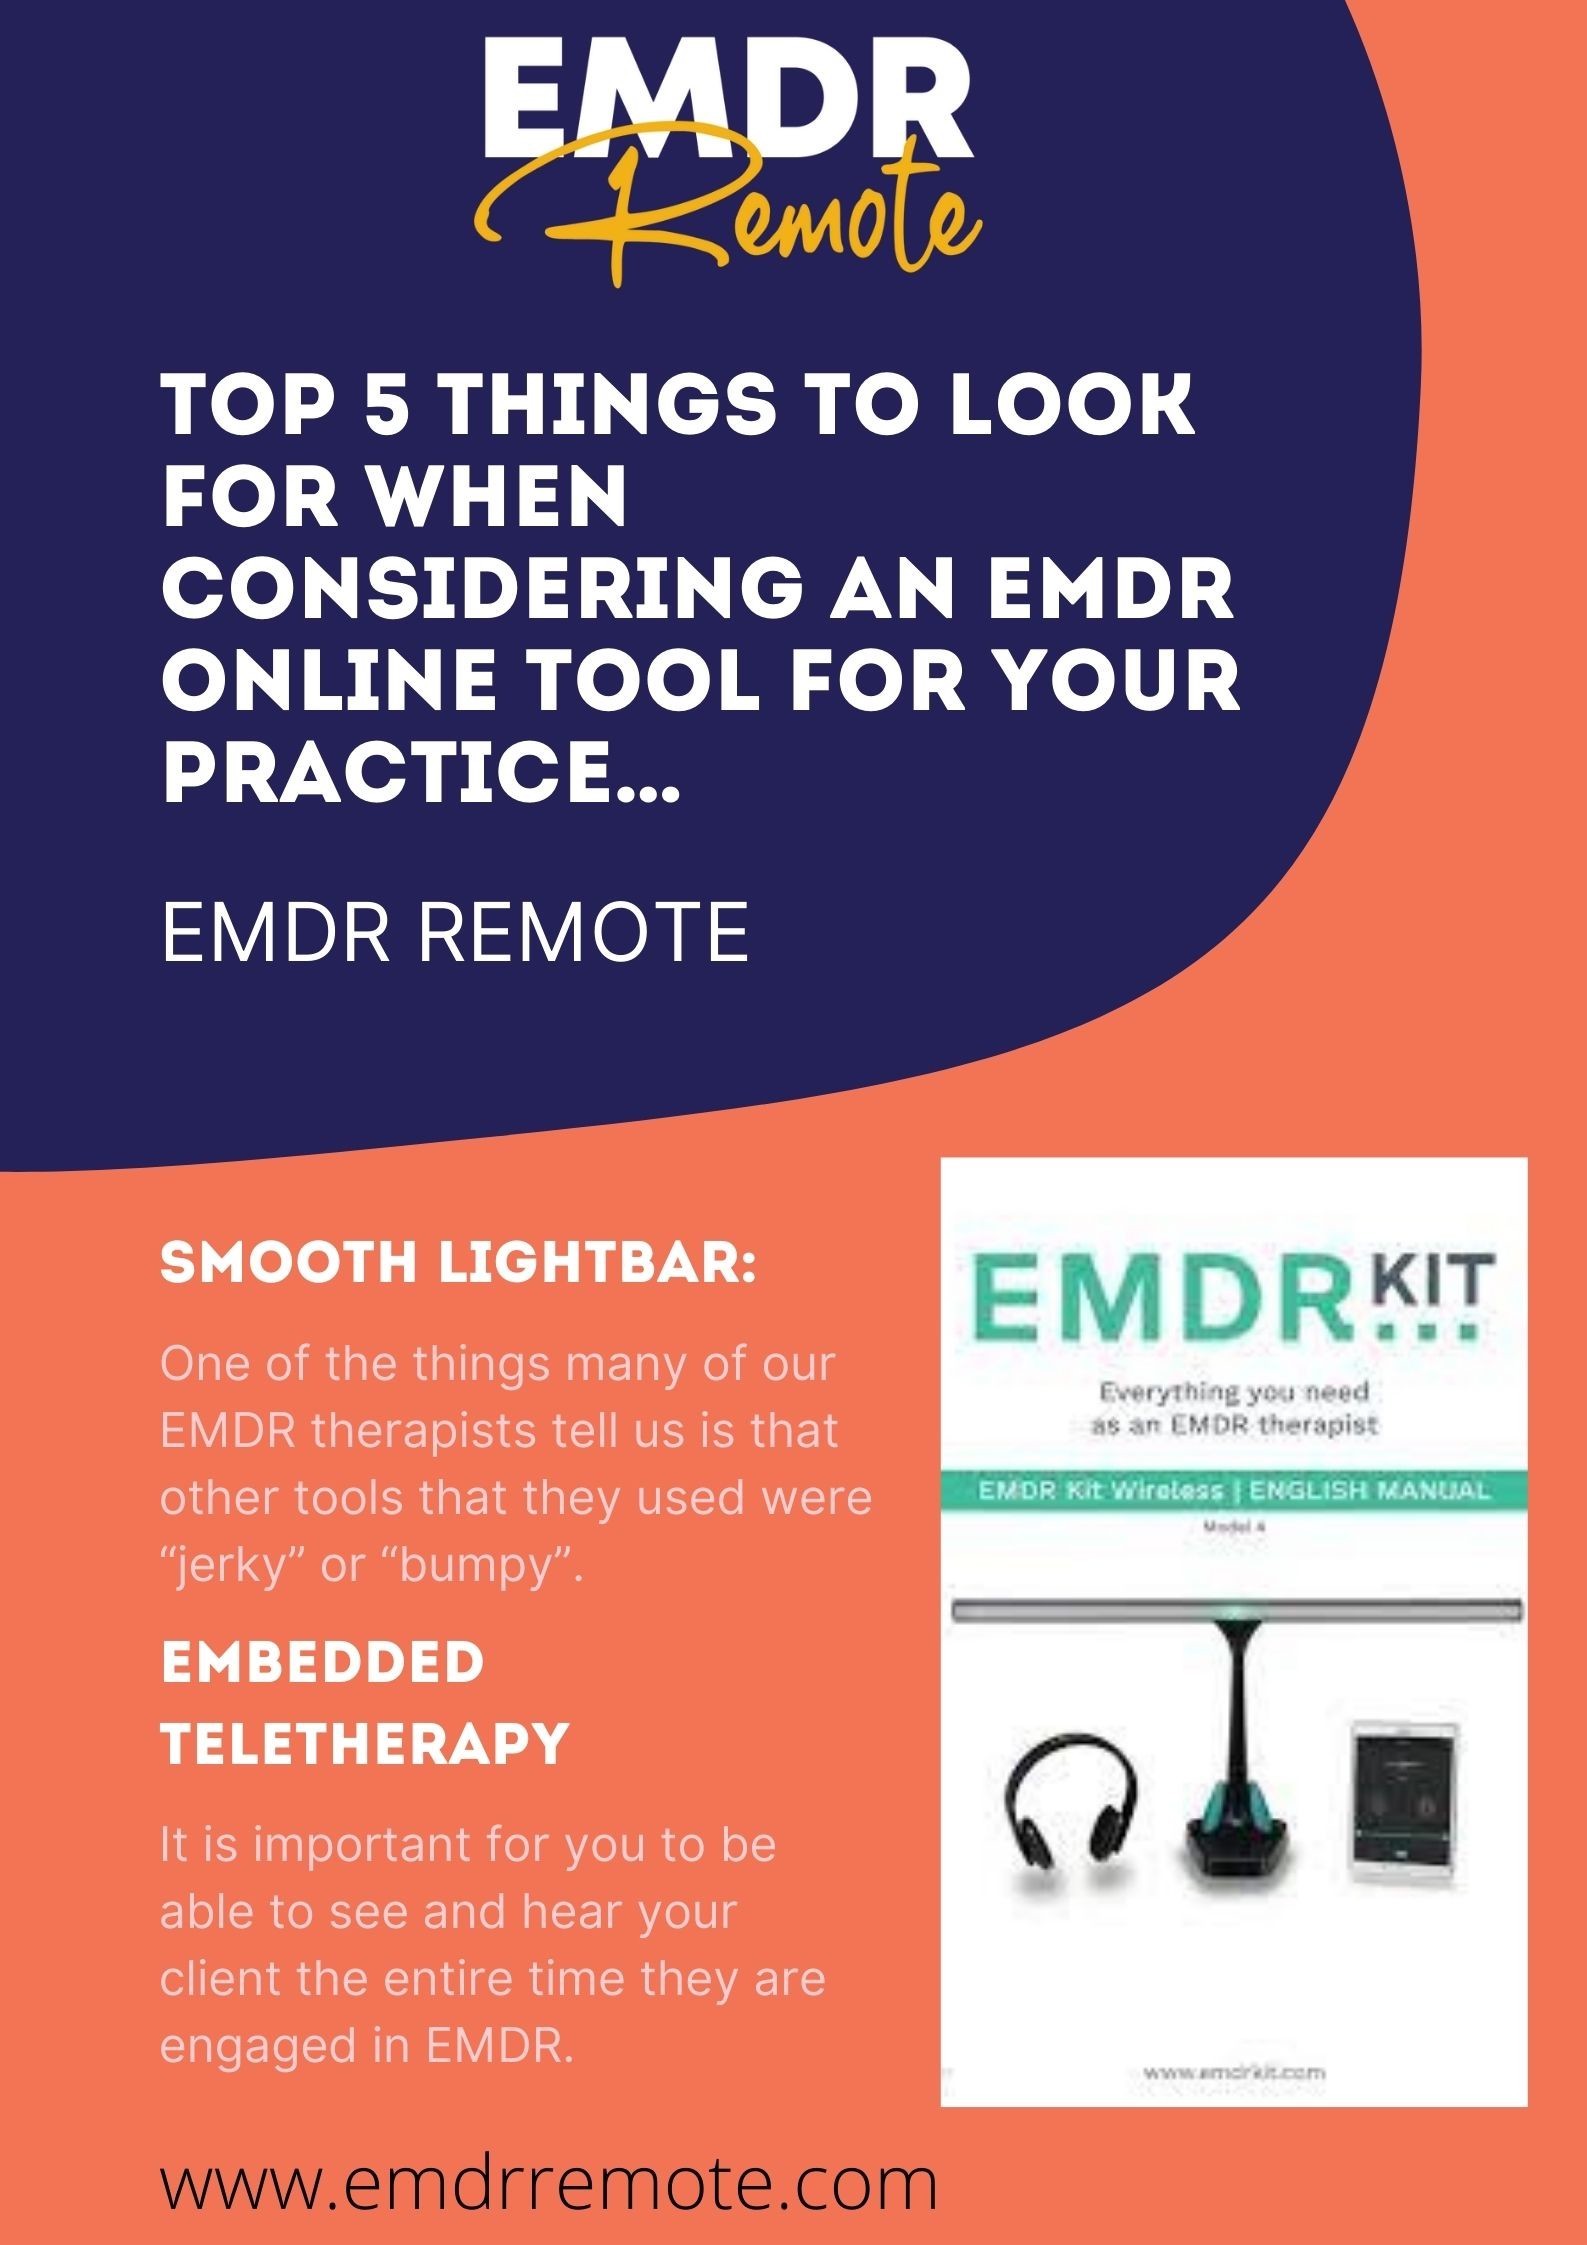 Top 5 Things To Look For When Considering An EMDR Online Tool For Your Practice…